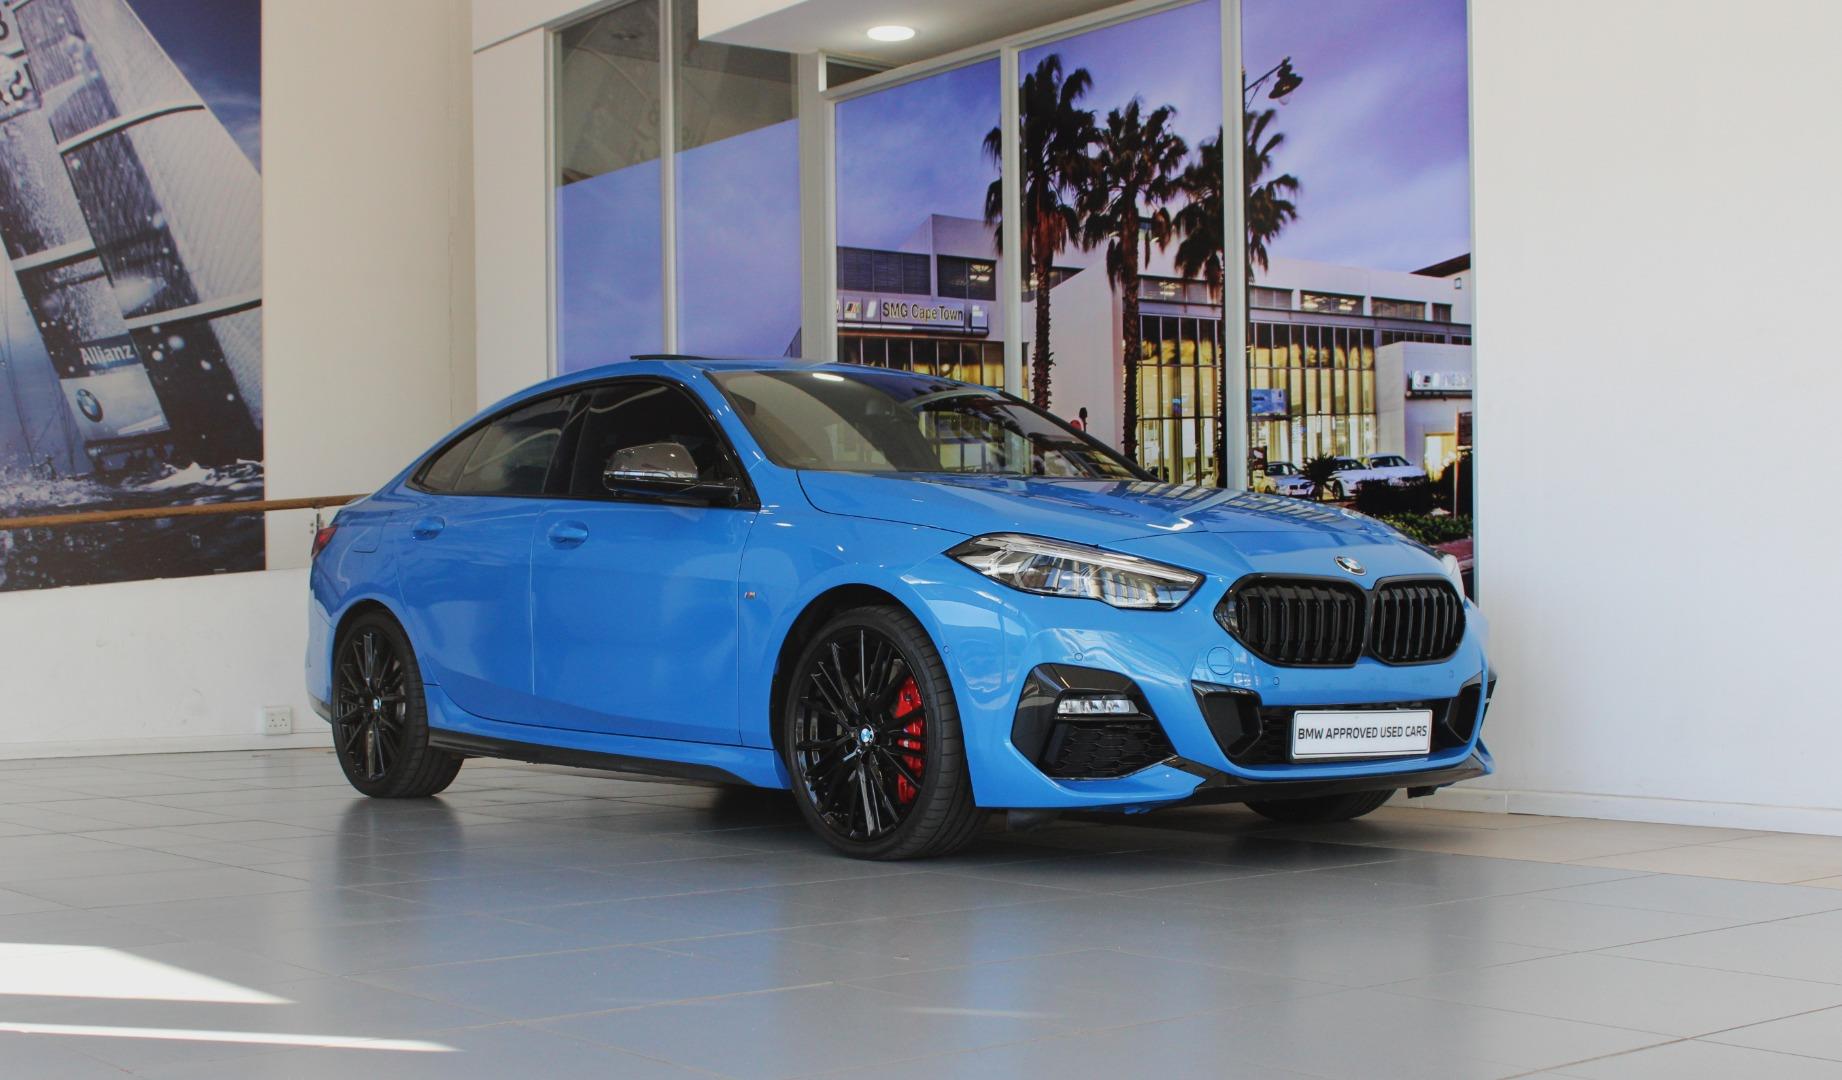 2022 BMW 218i GRAN COUPE M SPORT AT (F44)  for sale - SMG12|USED|115397